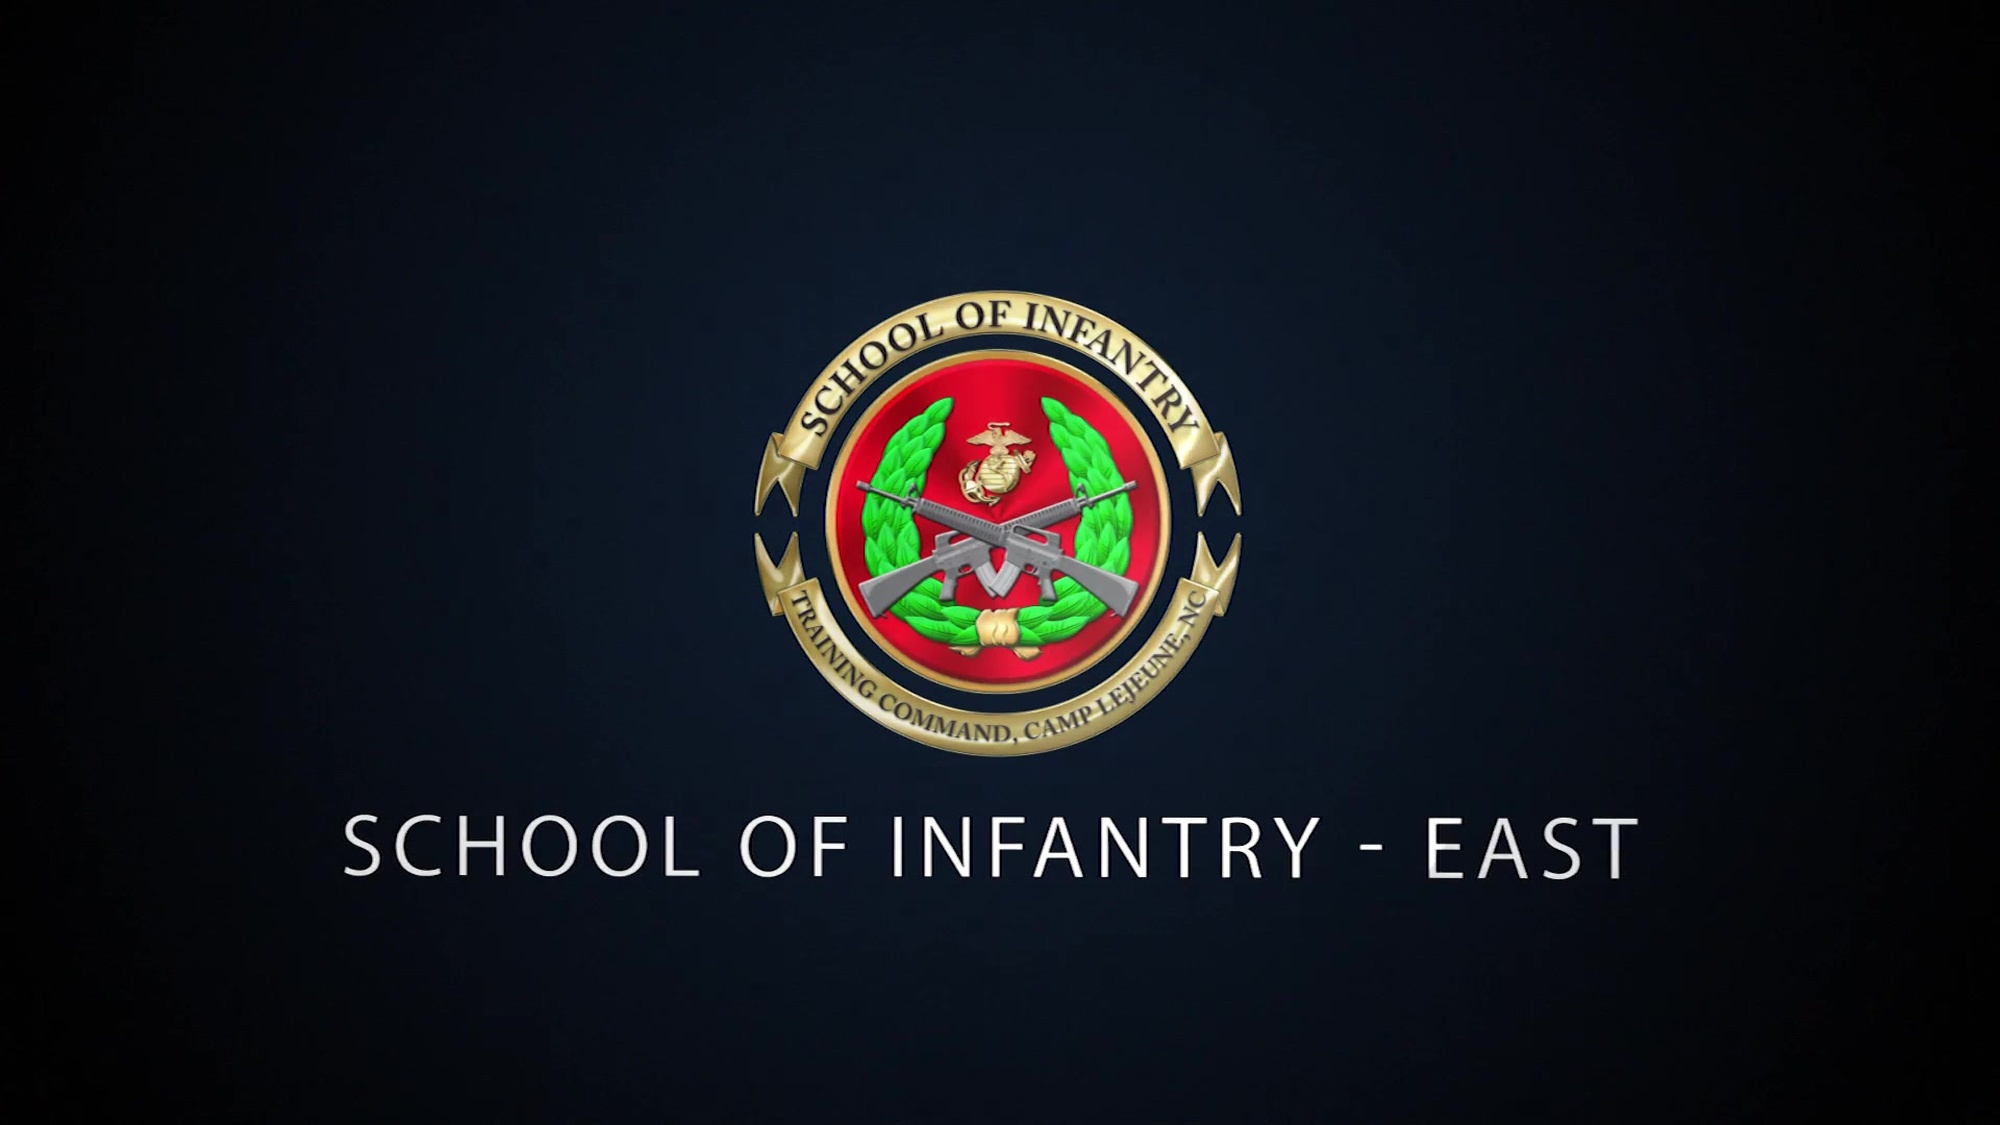 A brief overview documentary of the modern day training that takes place at School of Infantry East, aboard Camp Geiger, NC . This video production educates internal and external audiences on how the School of Infantry East supports the Marine Corps mission. (U.S. Marine Corps video by Cpl Andrew Kuppers)